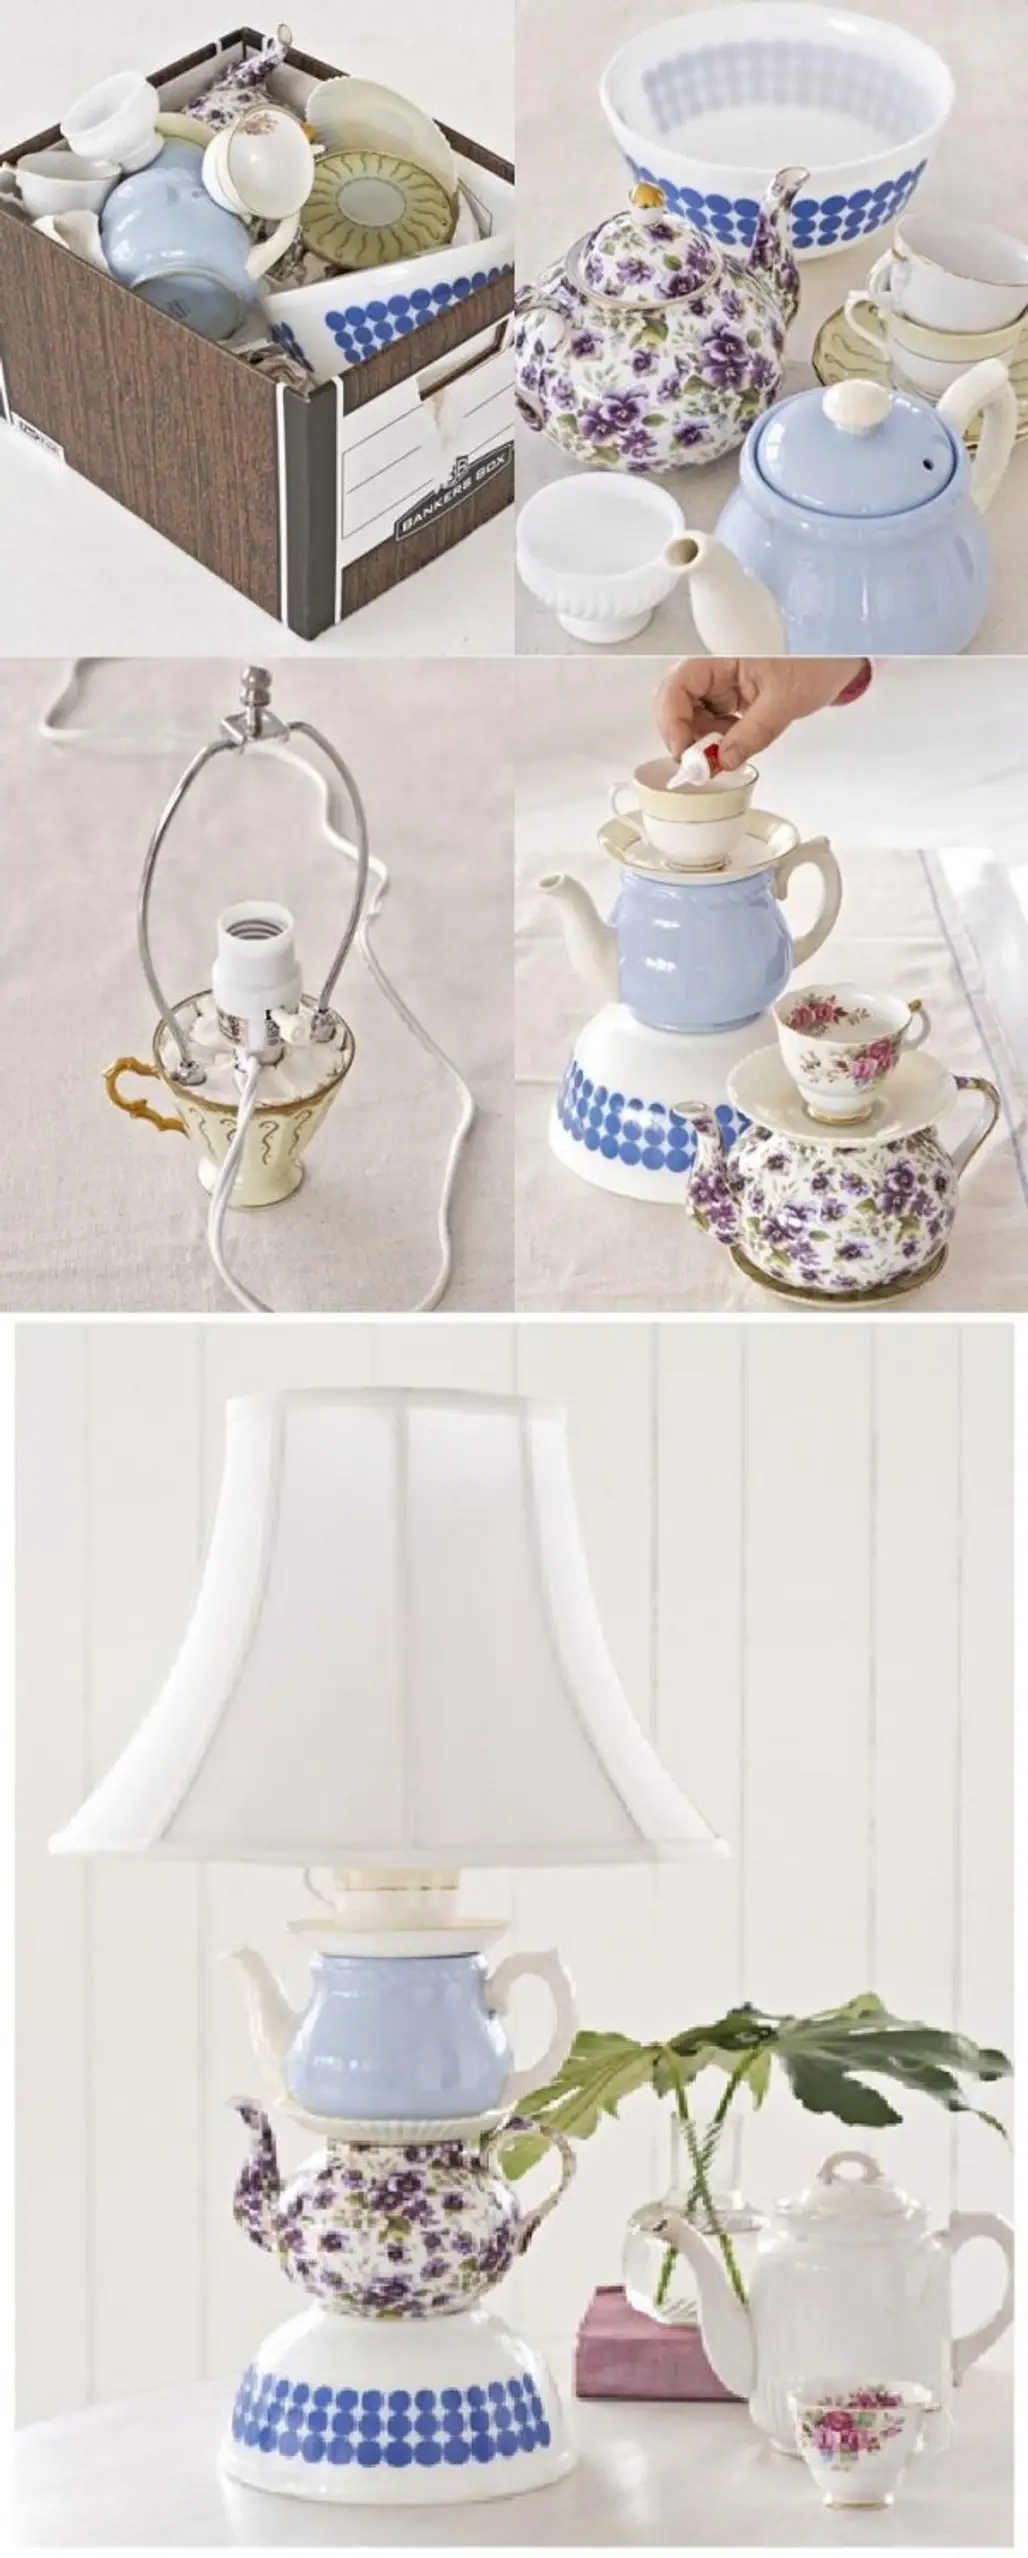 product,porcelain,tablecloth,dishware,table,